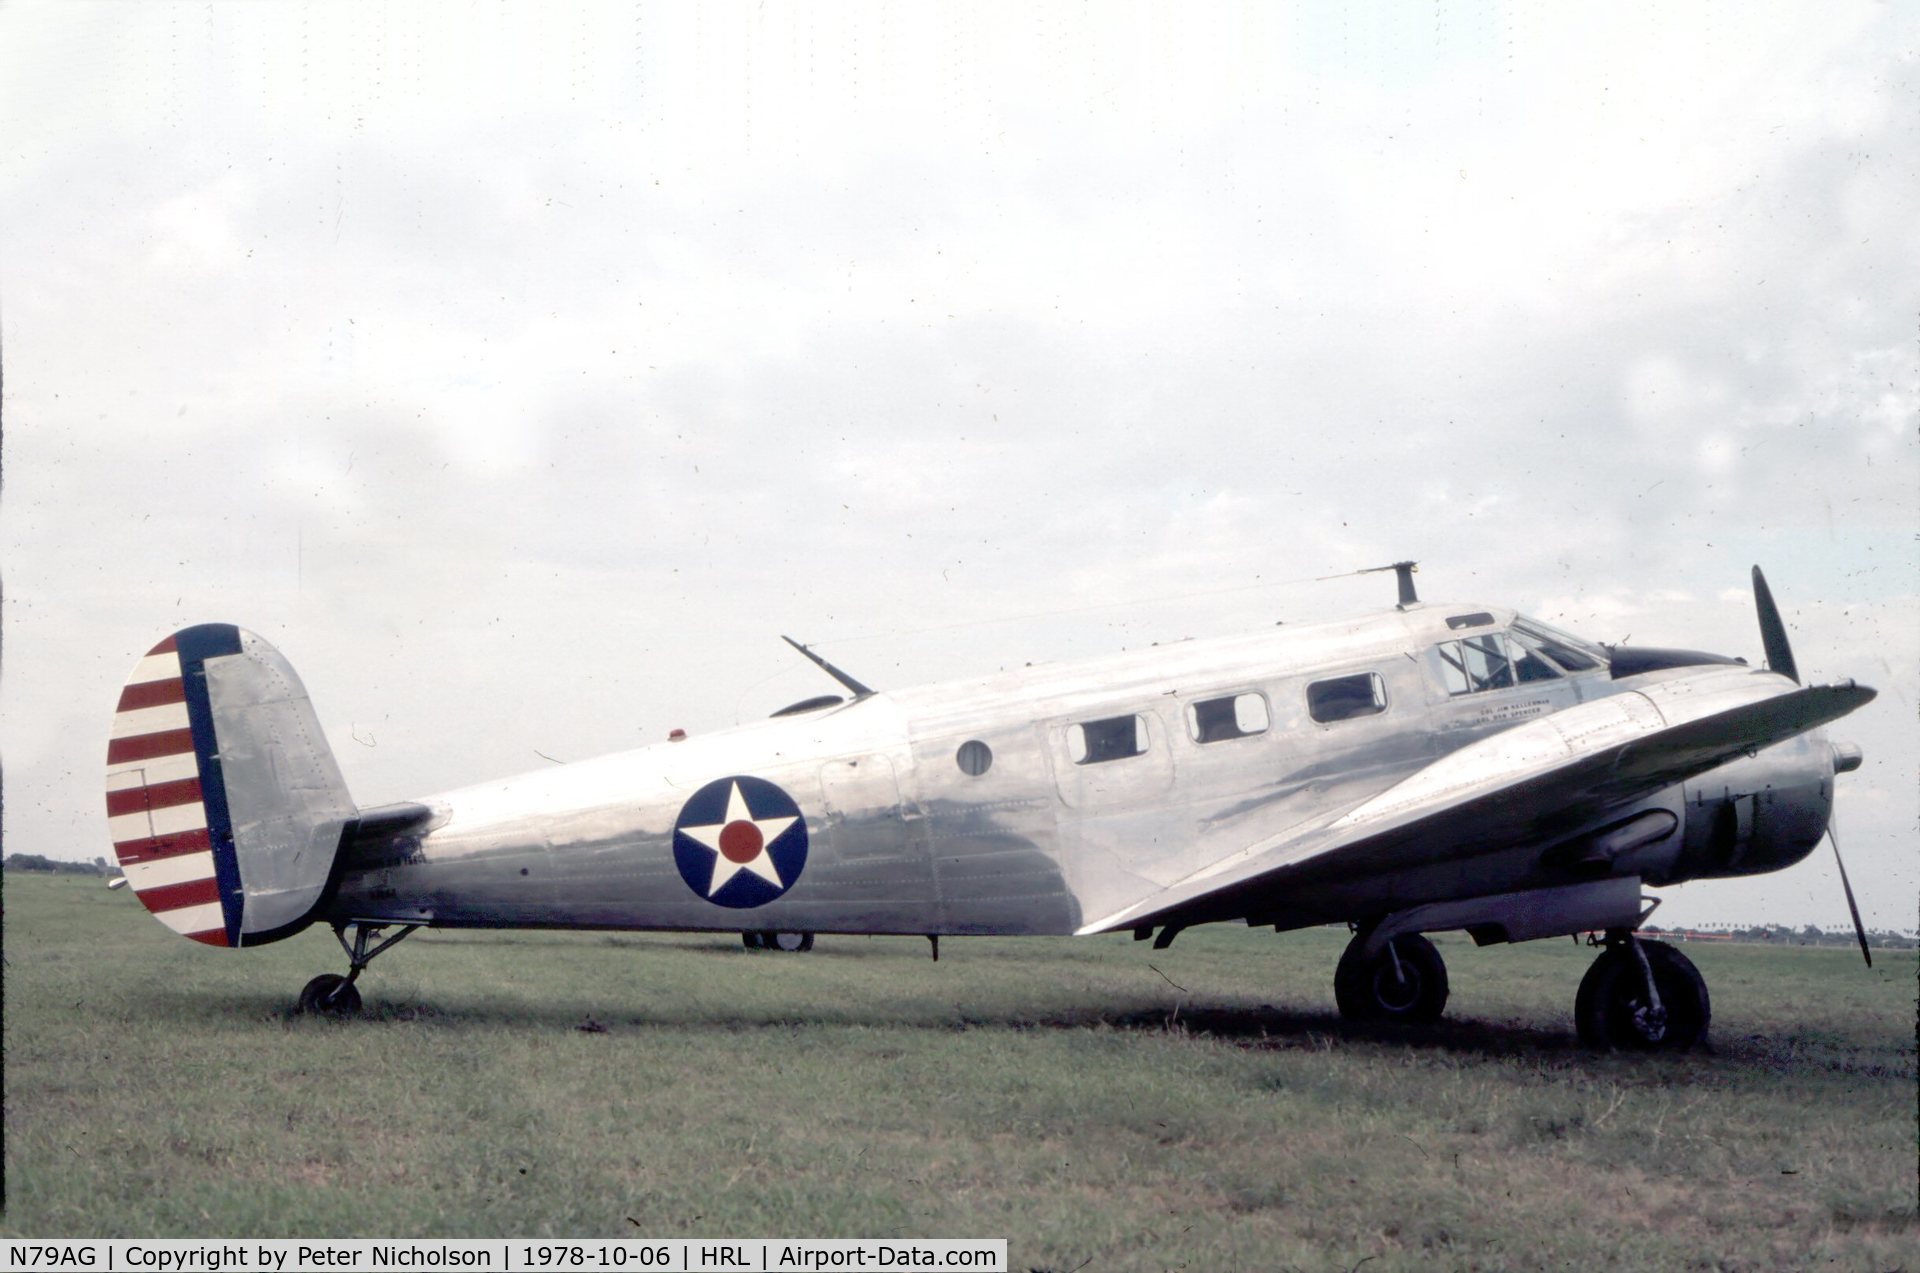 N79AG, 1952 Beech D18S C/N A-806, This Expeditor was displayed by the Confederate Air Force at their 1978 Airshow.